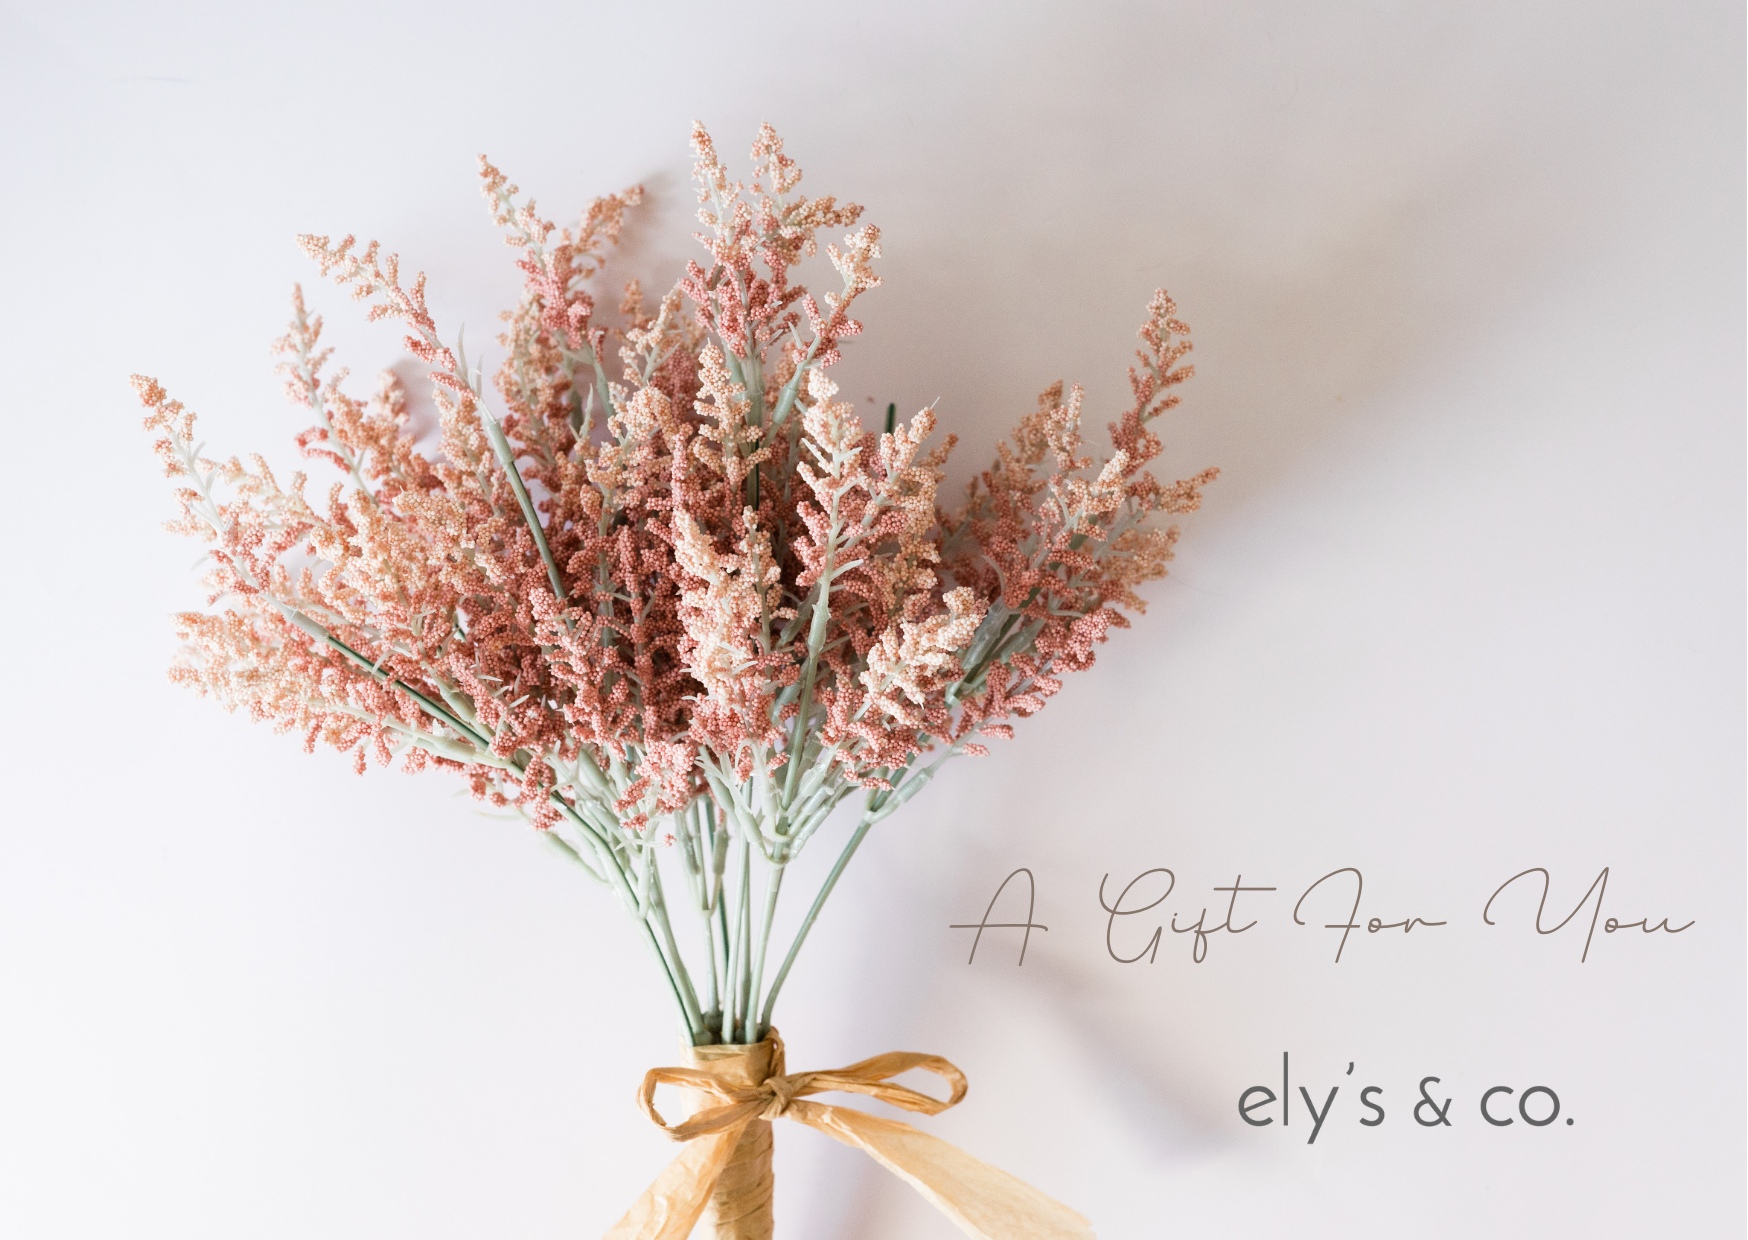 Ely&#39;s &amp; Co. Gift Card